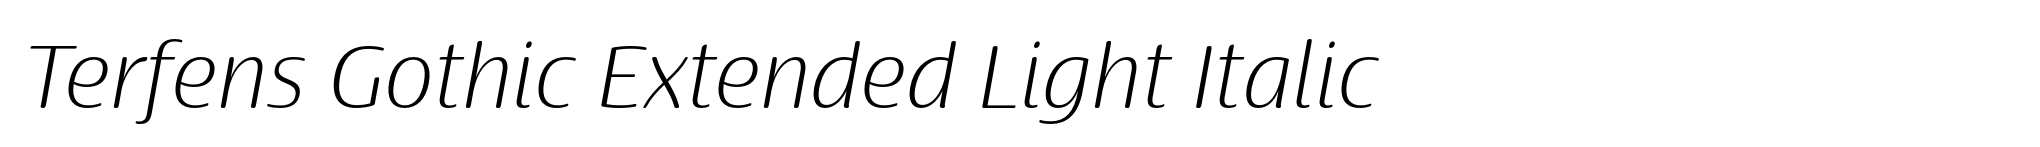 Terfens Gothic Extended Light Italic image